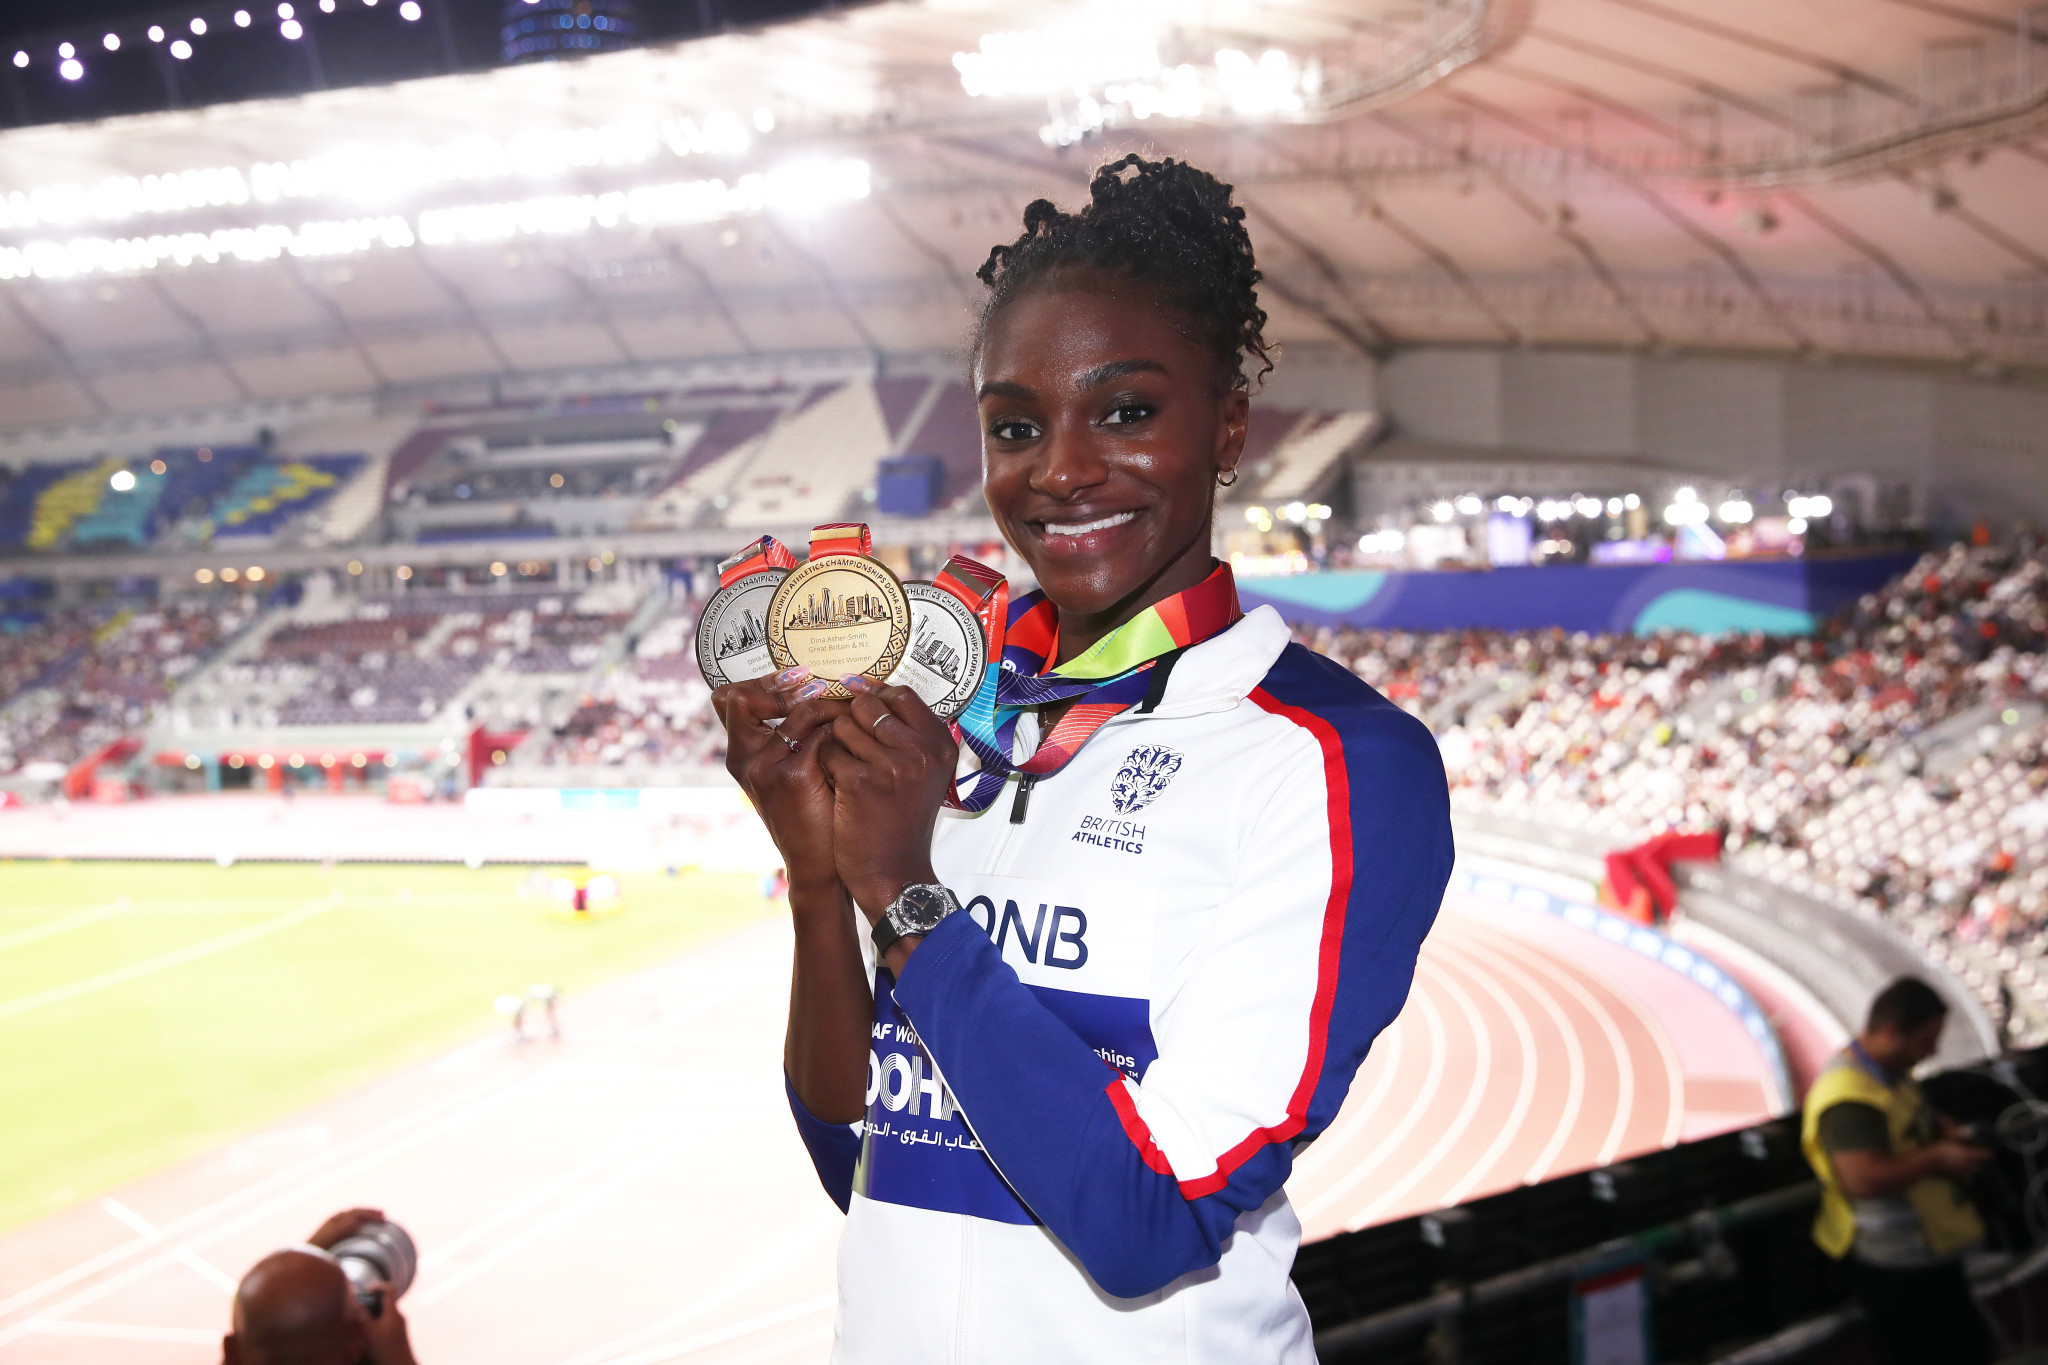 Britain's world 200m champion Dina Asher-Smith has said the IOC ban on podium protests is "a shame" ©Getty Images